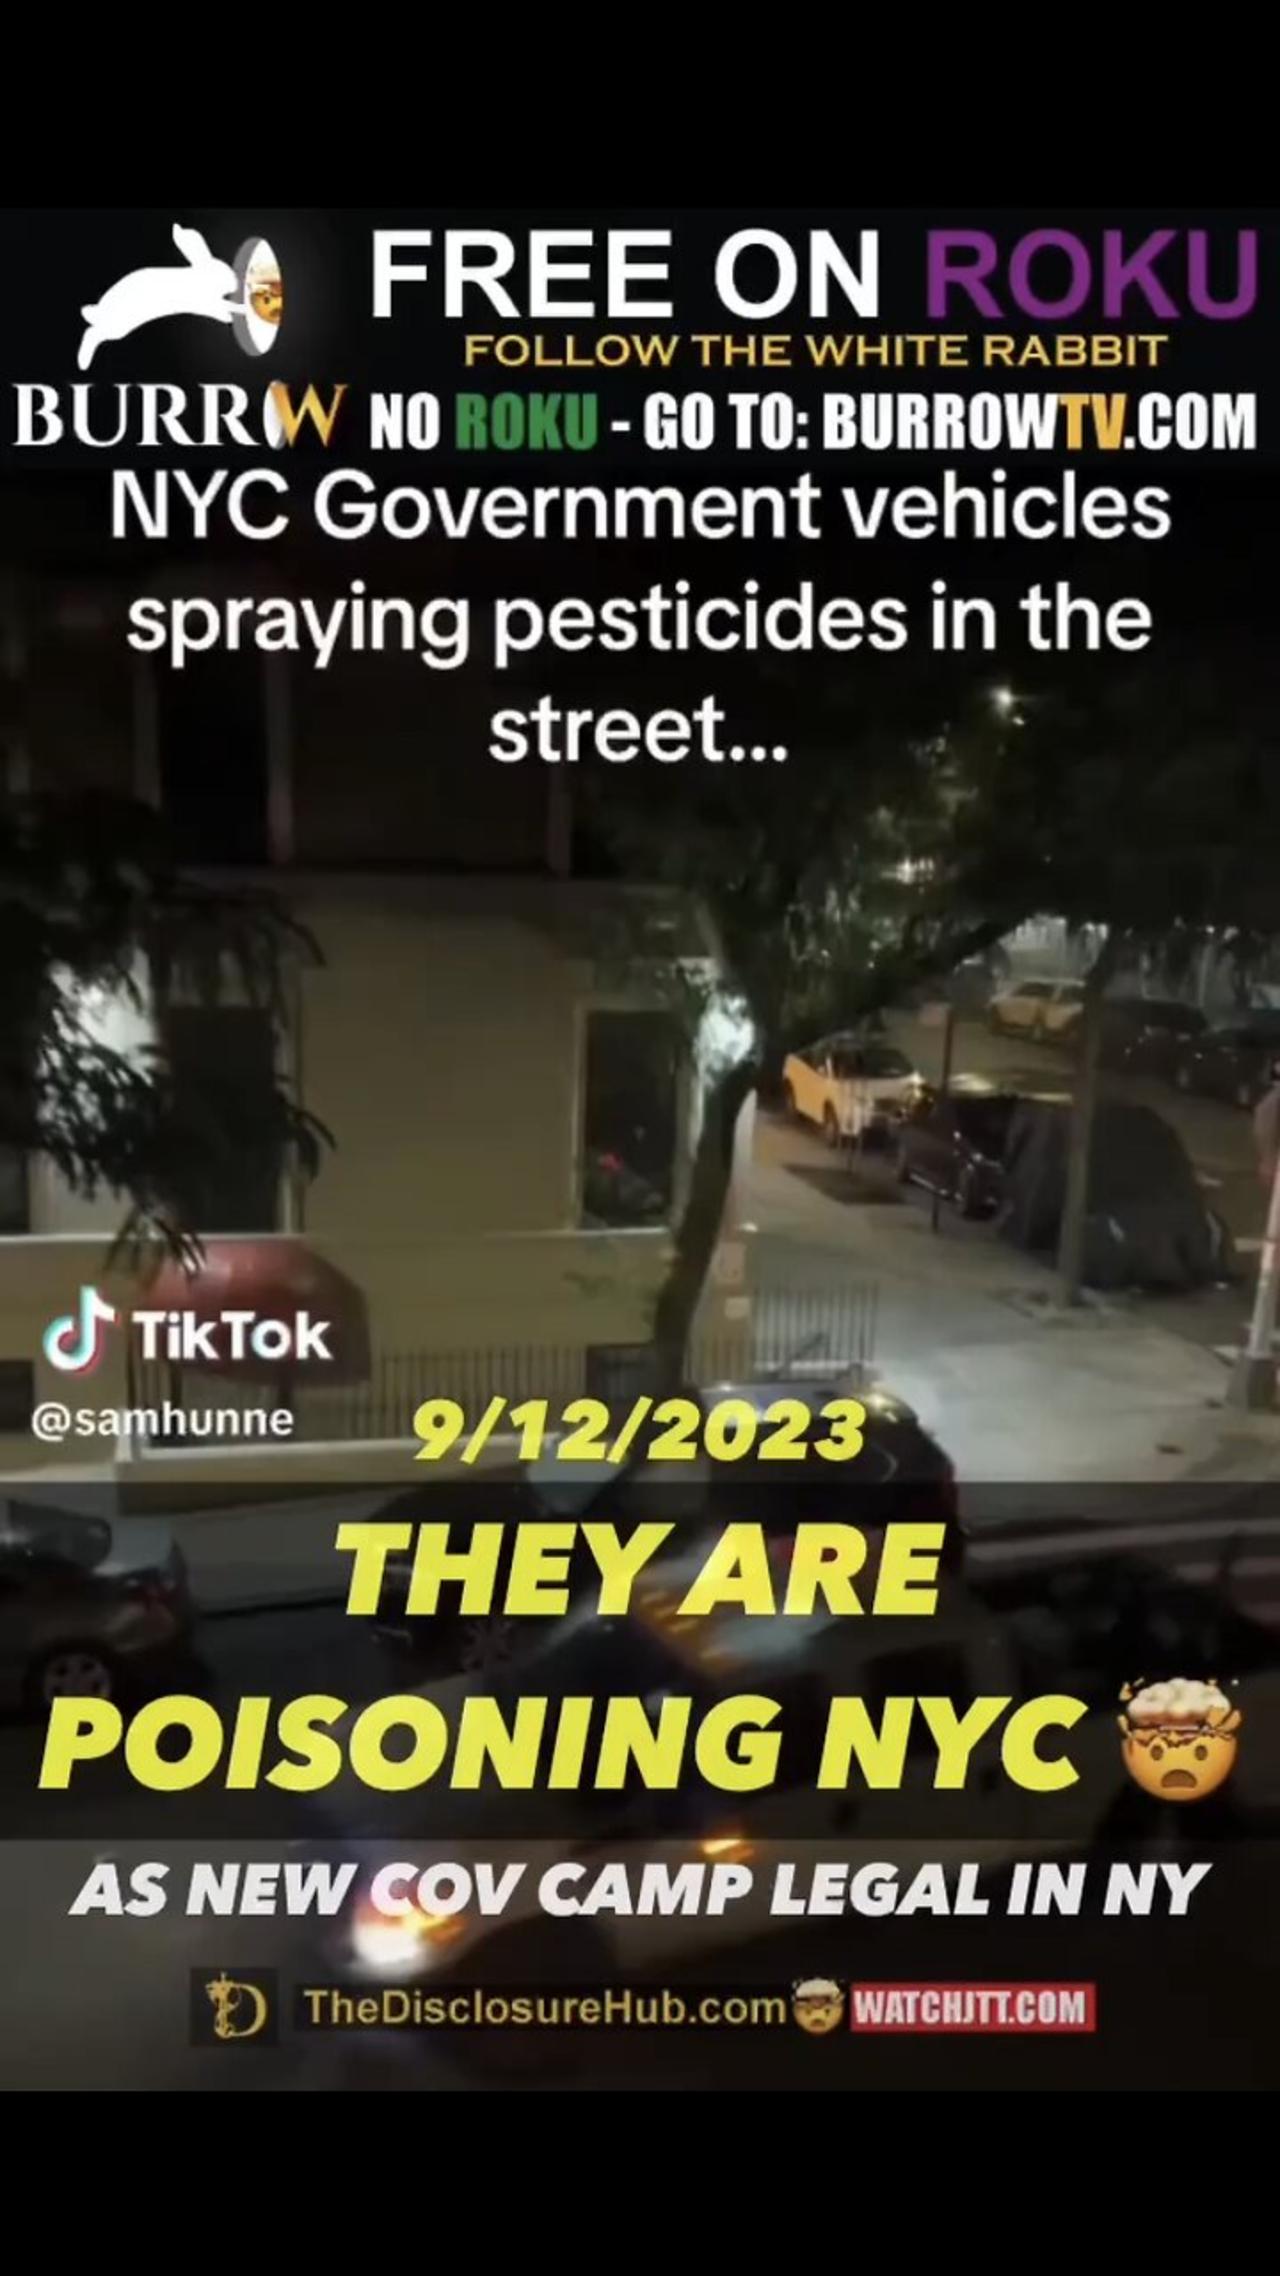 Poison ☠️ being sprayed in NY, coming to a city near you soon